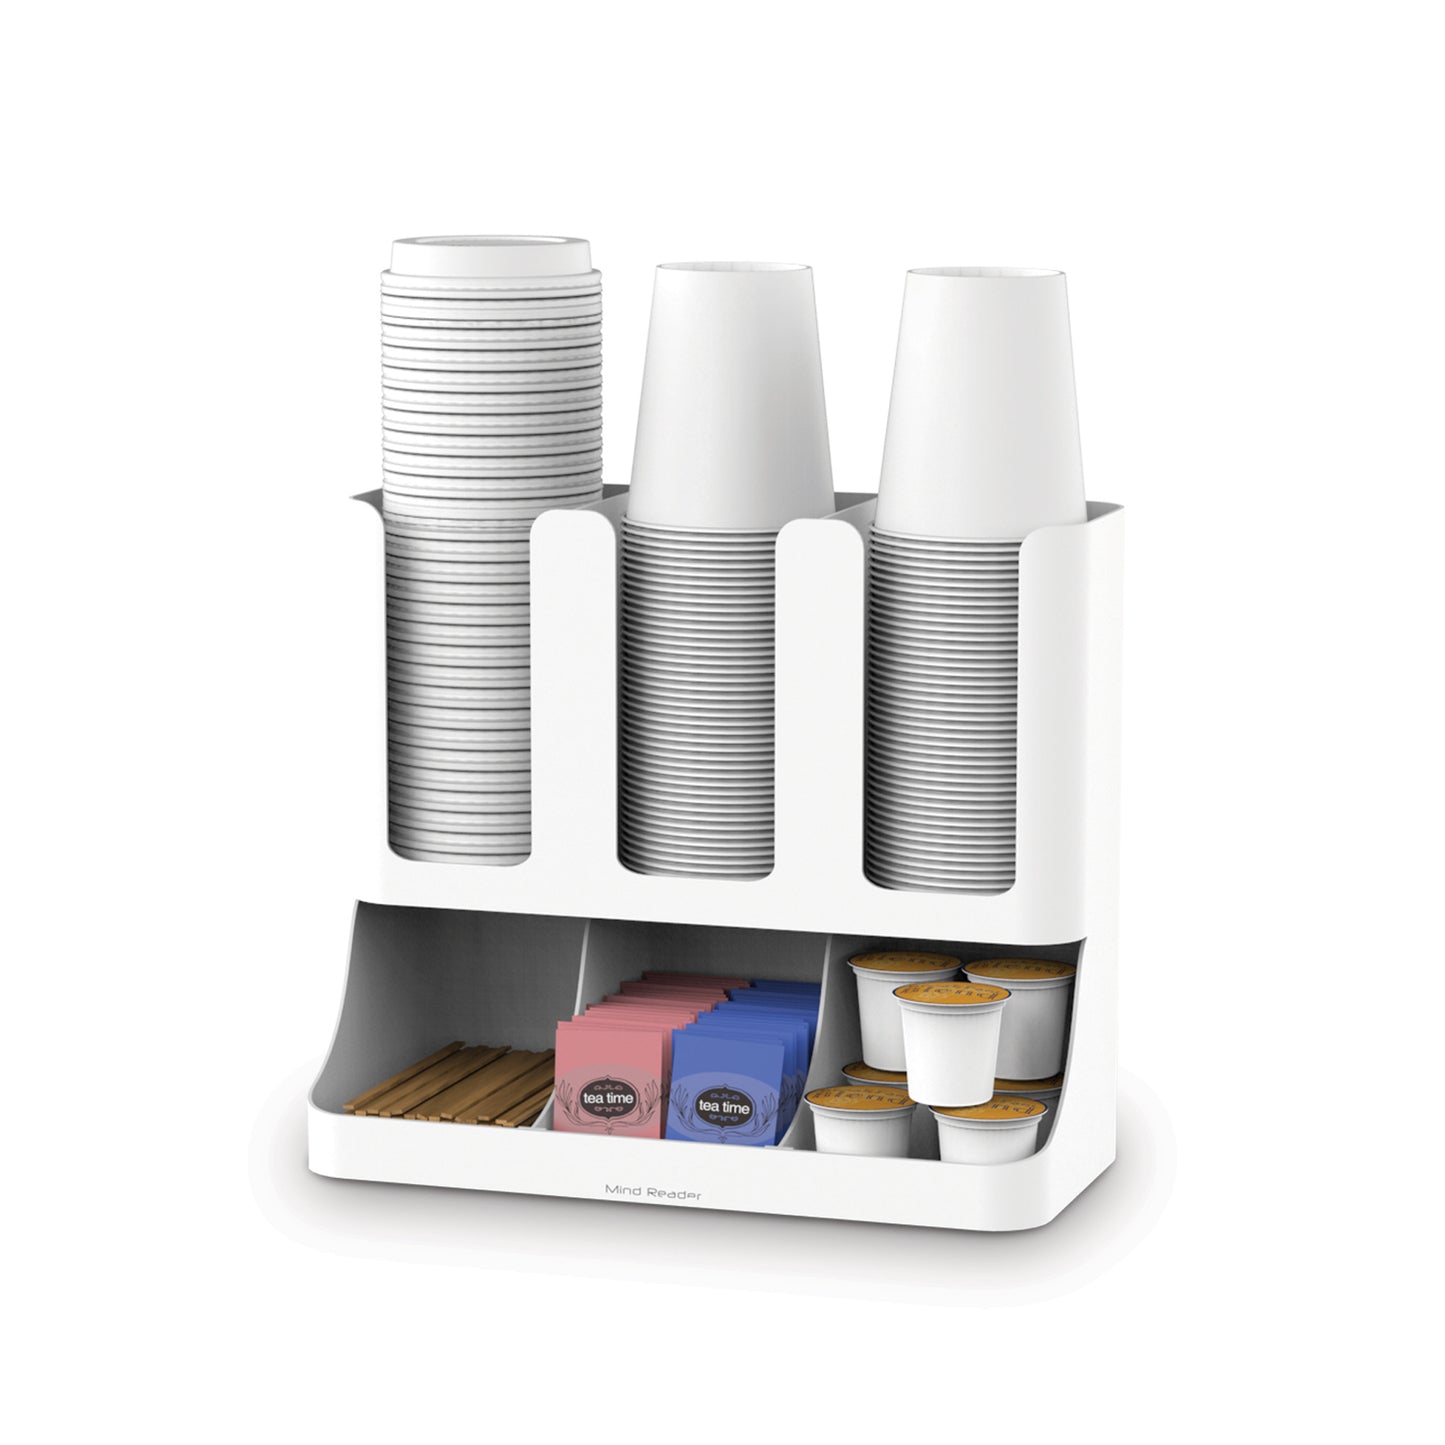 Mind Reader Cup and Condiment Station, Countertop Organizer, Coffee Bar, Kitchen, Stirrers, 13"L x 6.4"W x 11.5"H